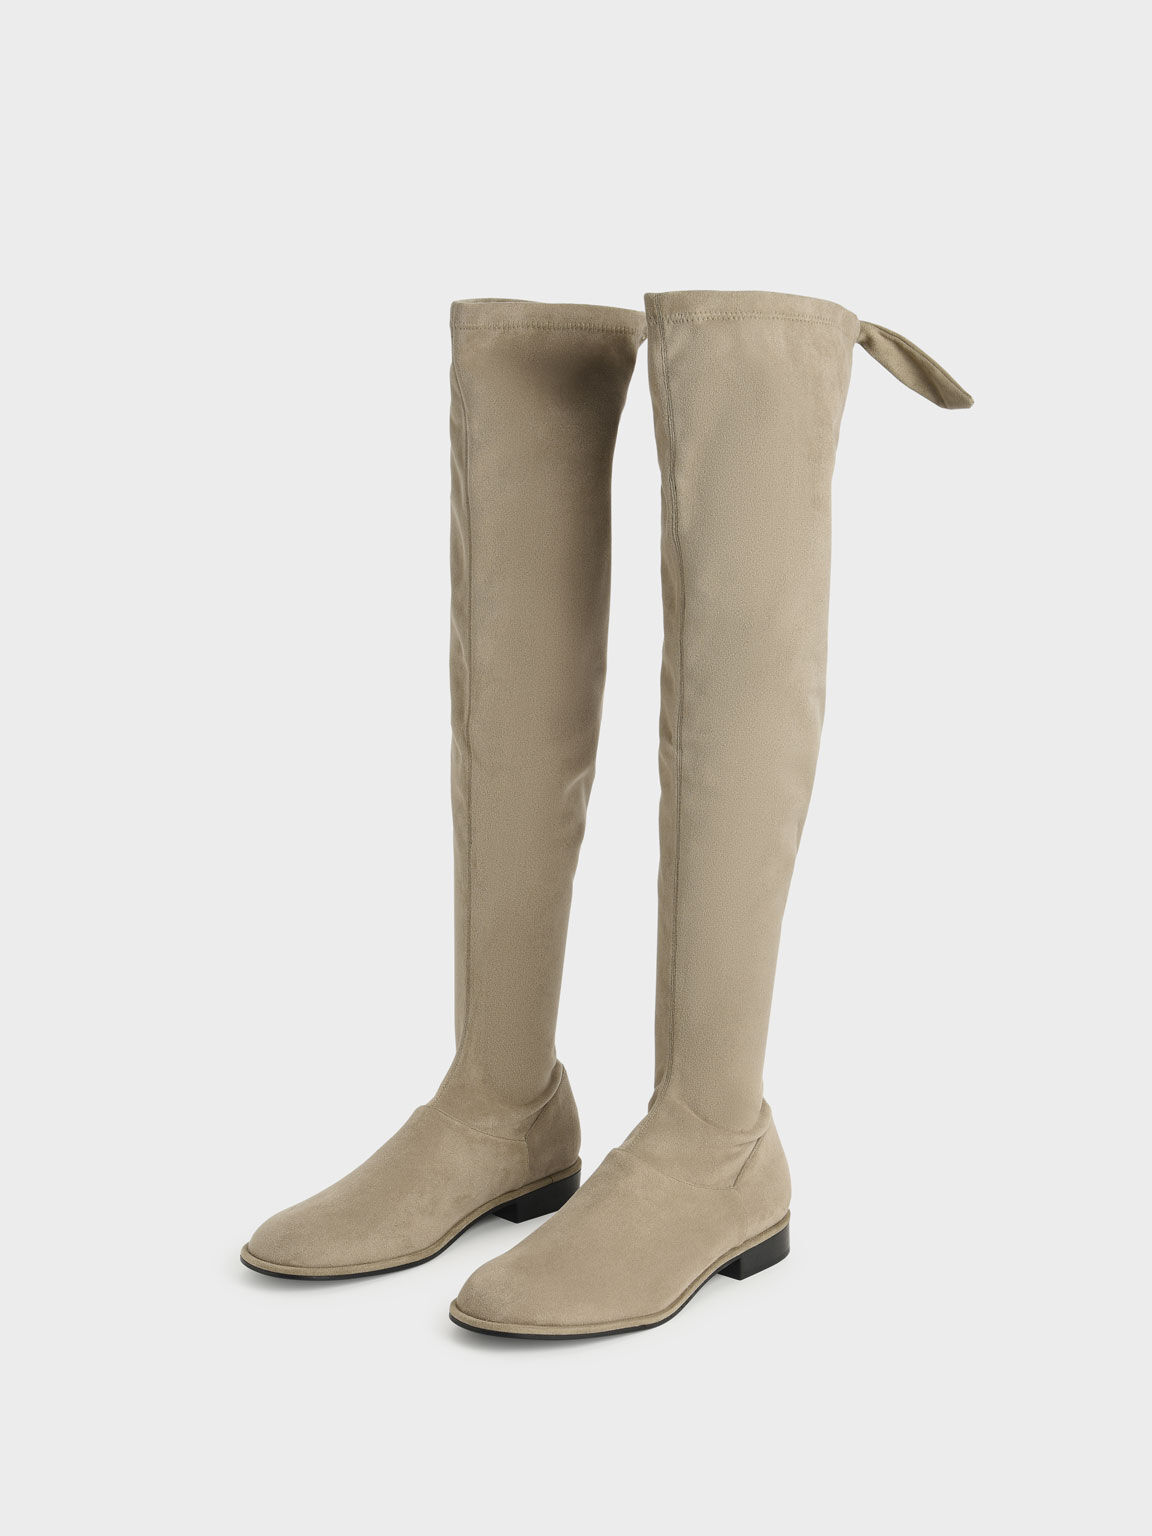 Textured Thigh-High Boots, Olive, hi-res